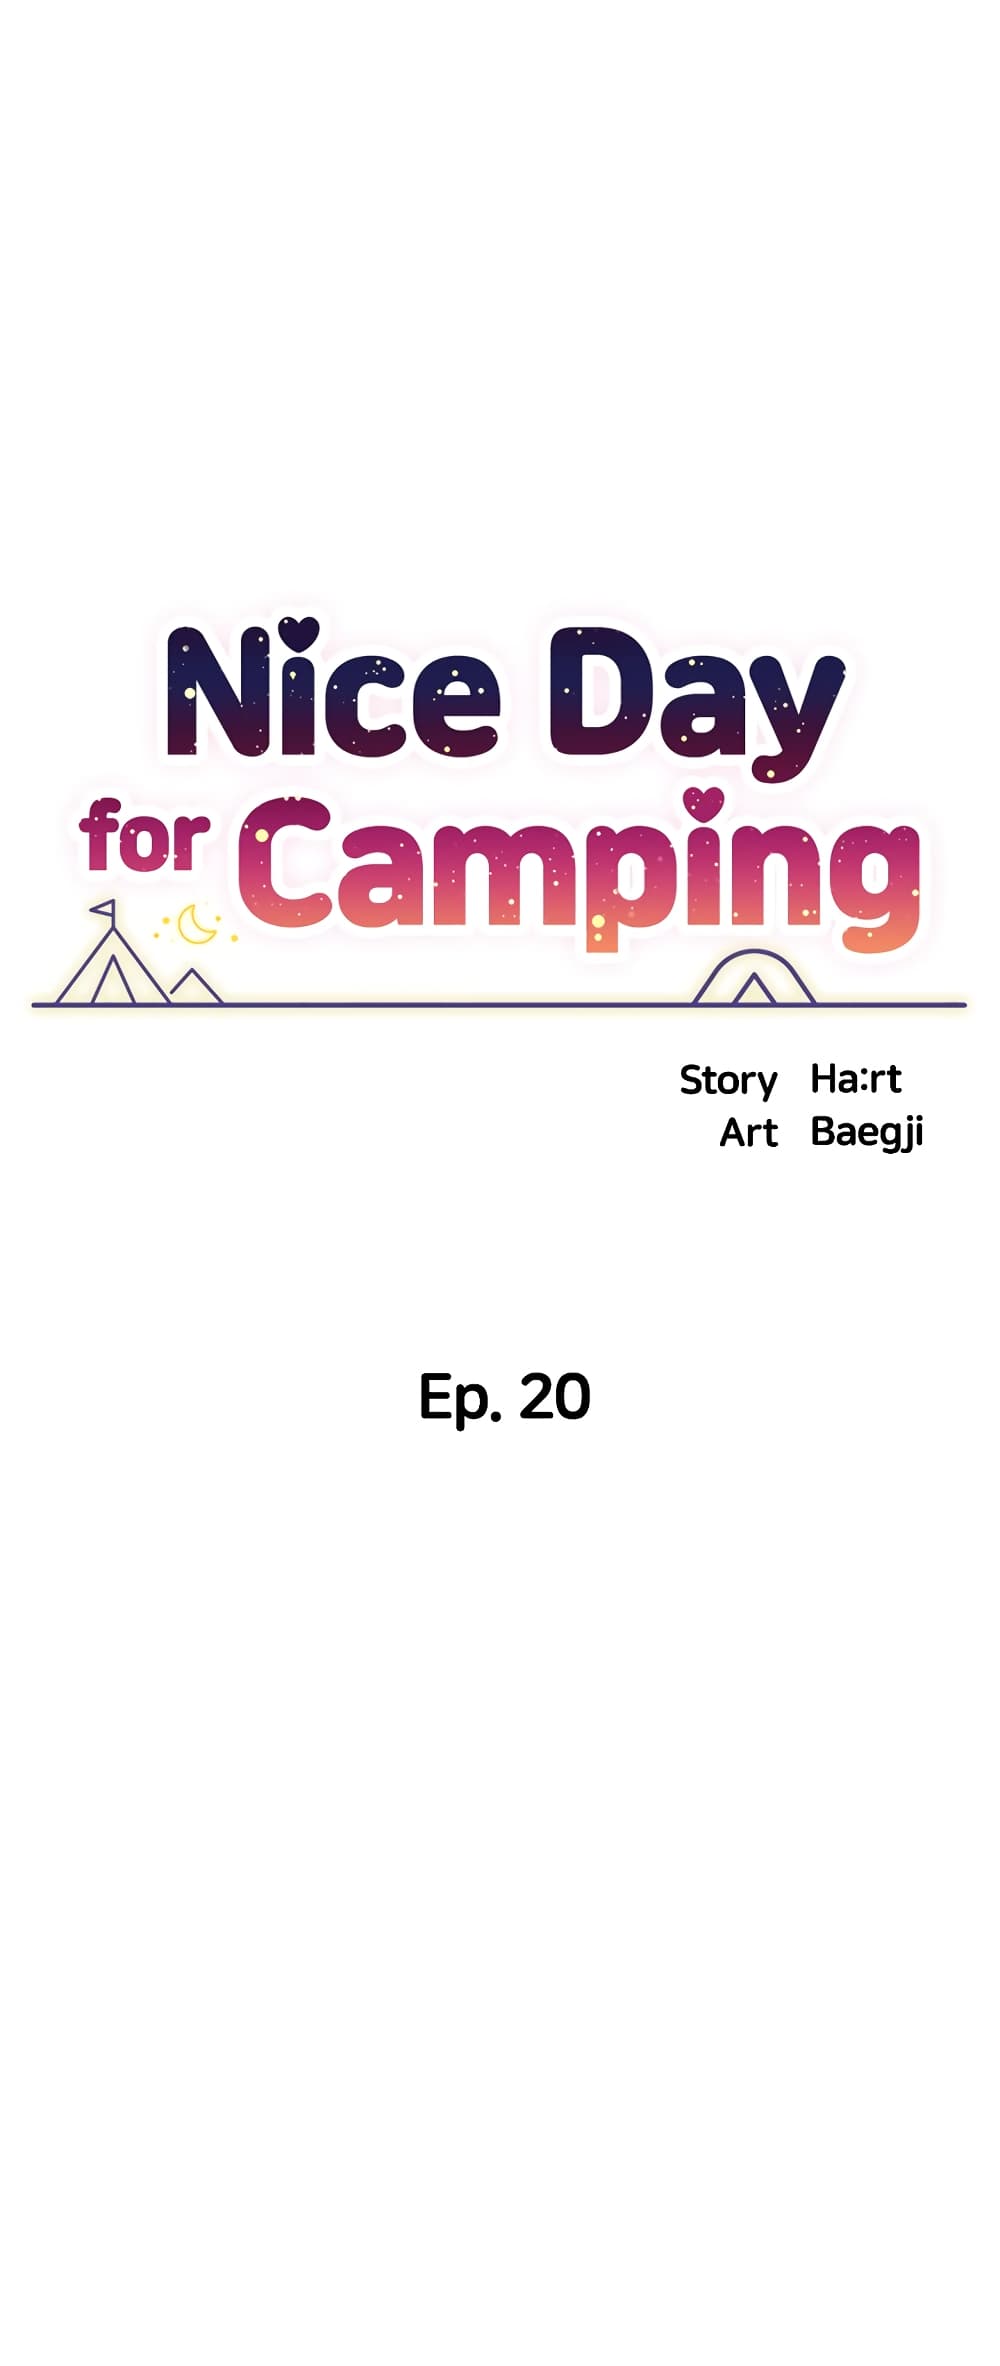 A Good Day to Camp 20-20